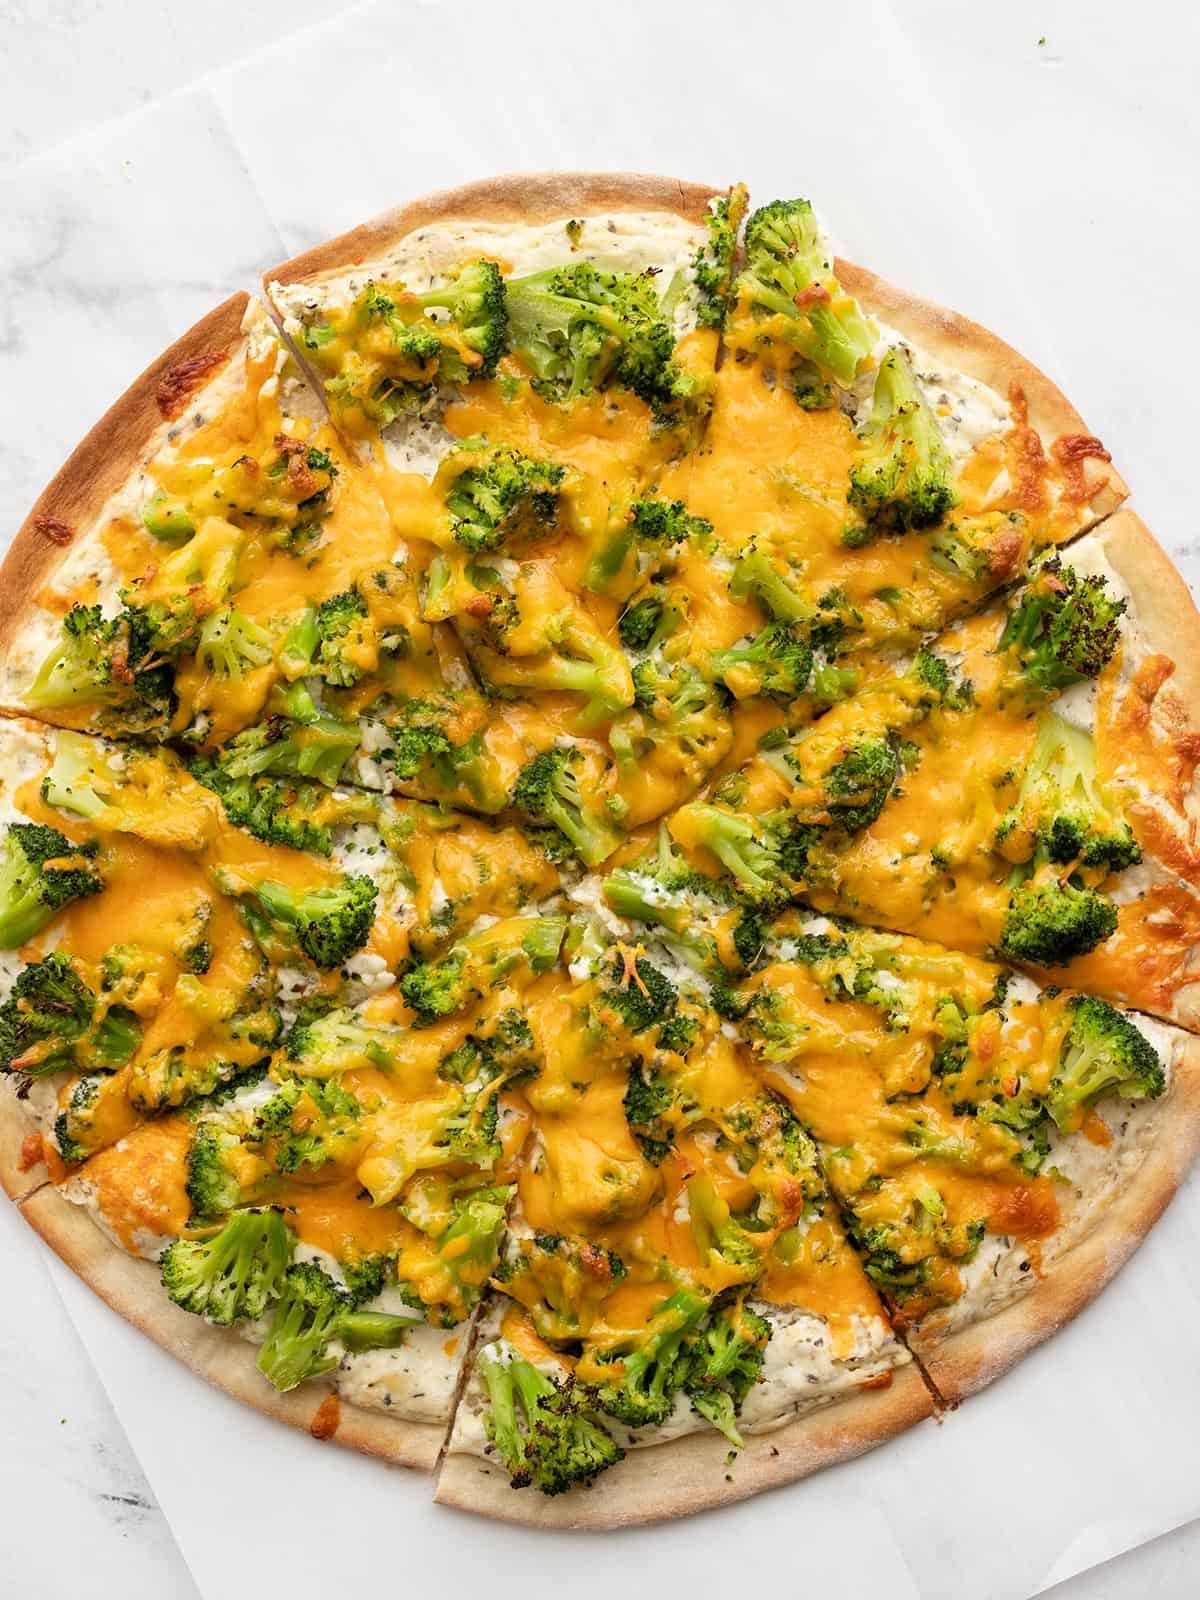 Overhead view of a broccoli cheddar pizza